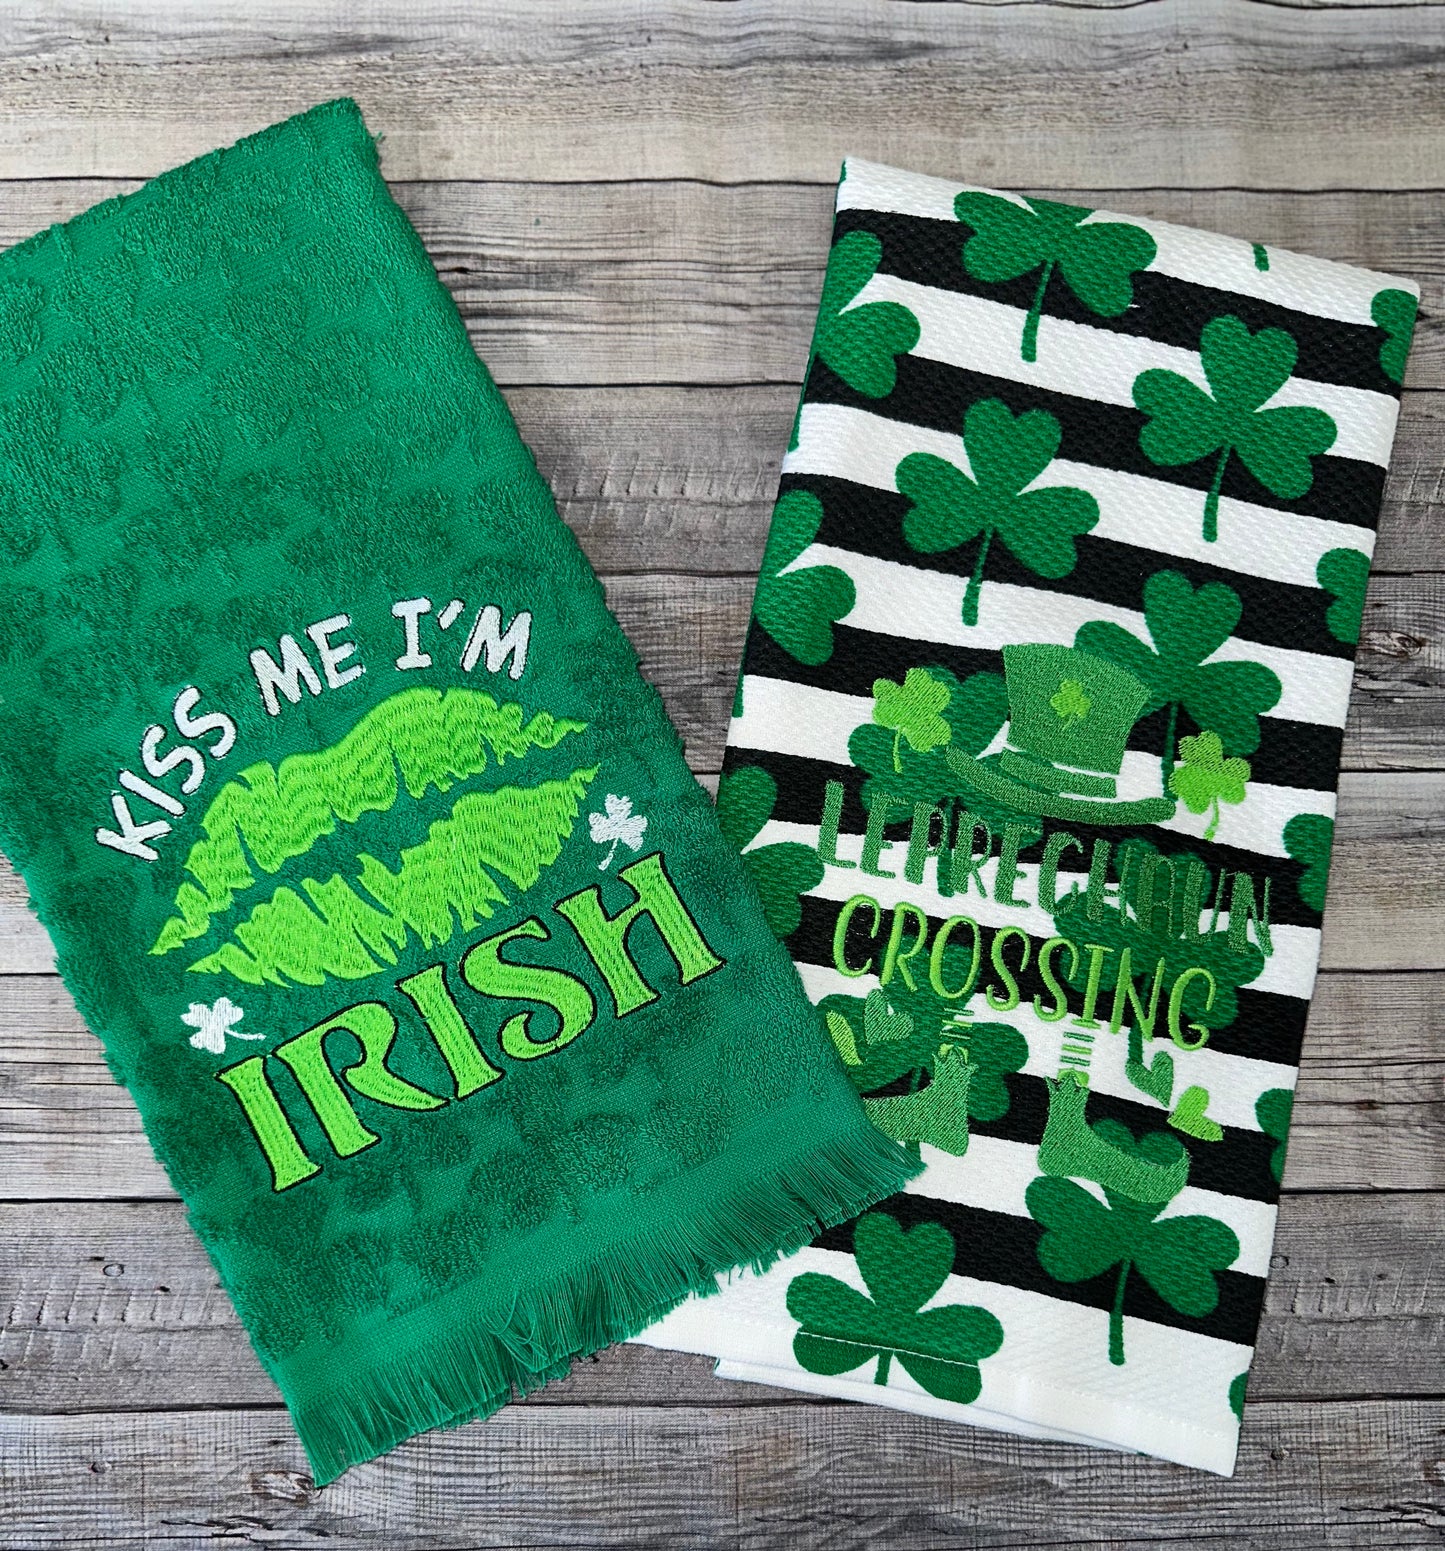 St. Patty's Day bathroom or kitchen towels. Embroidered on pattened and embossed towels